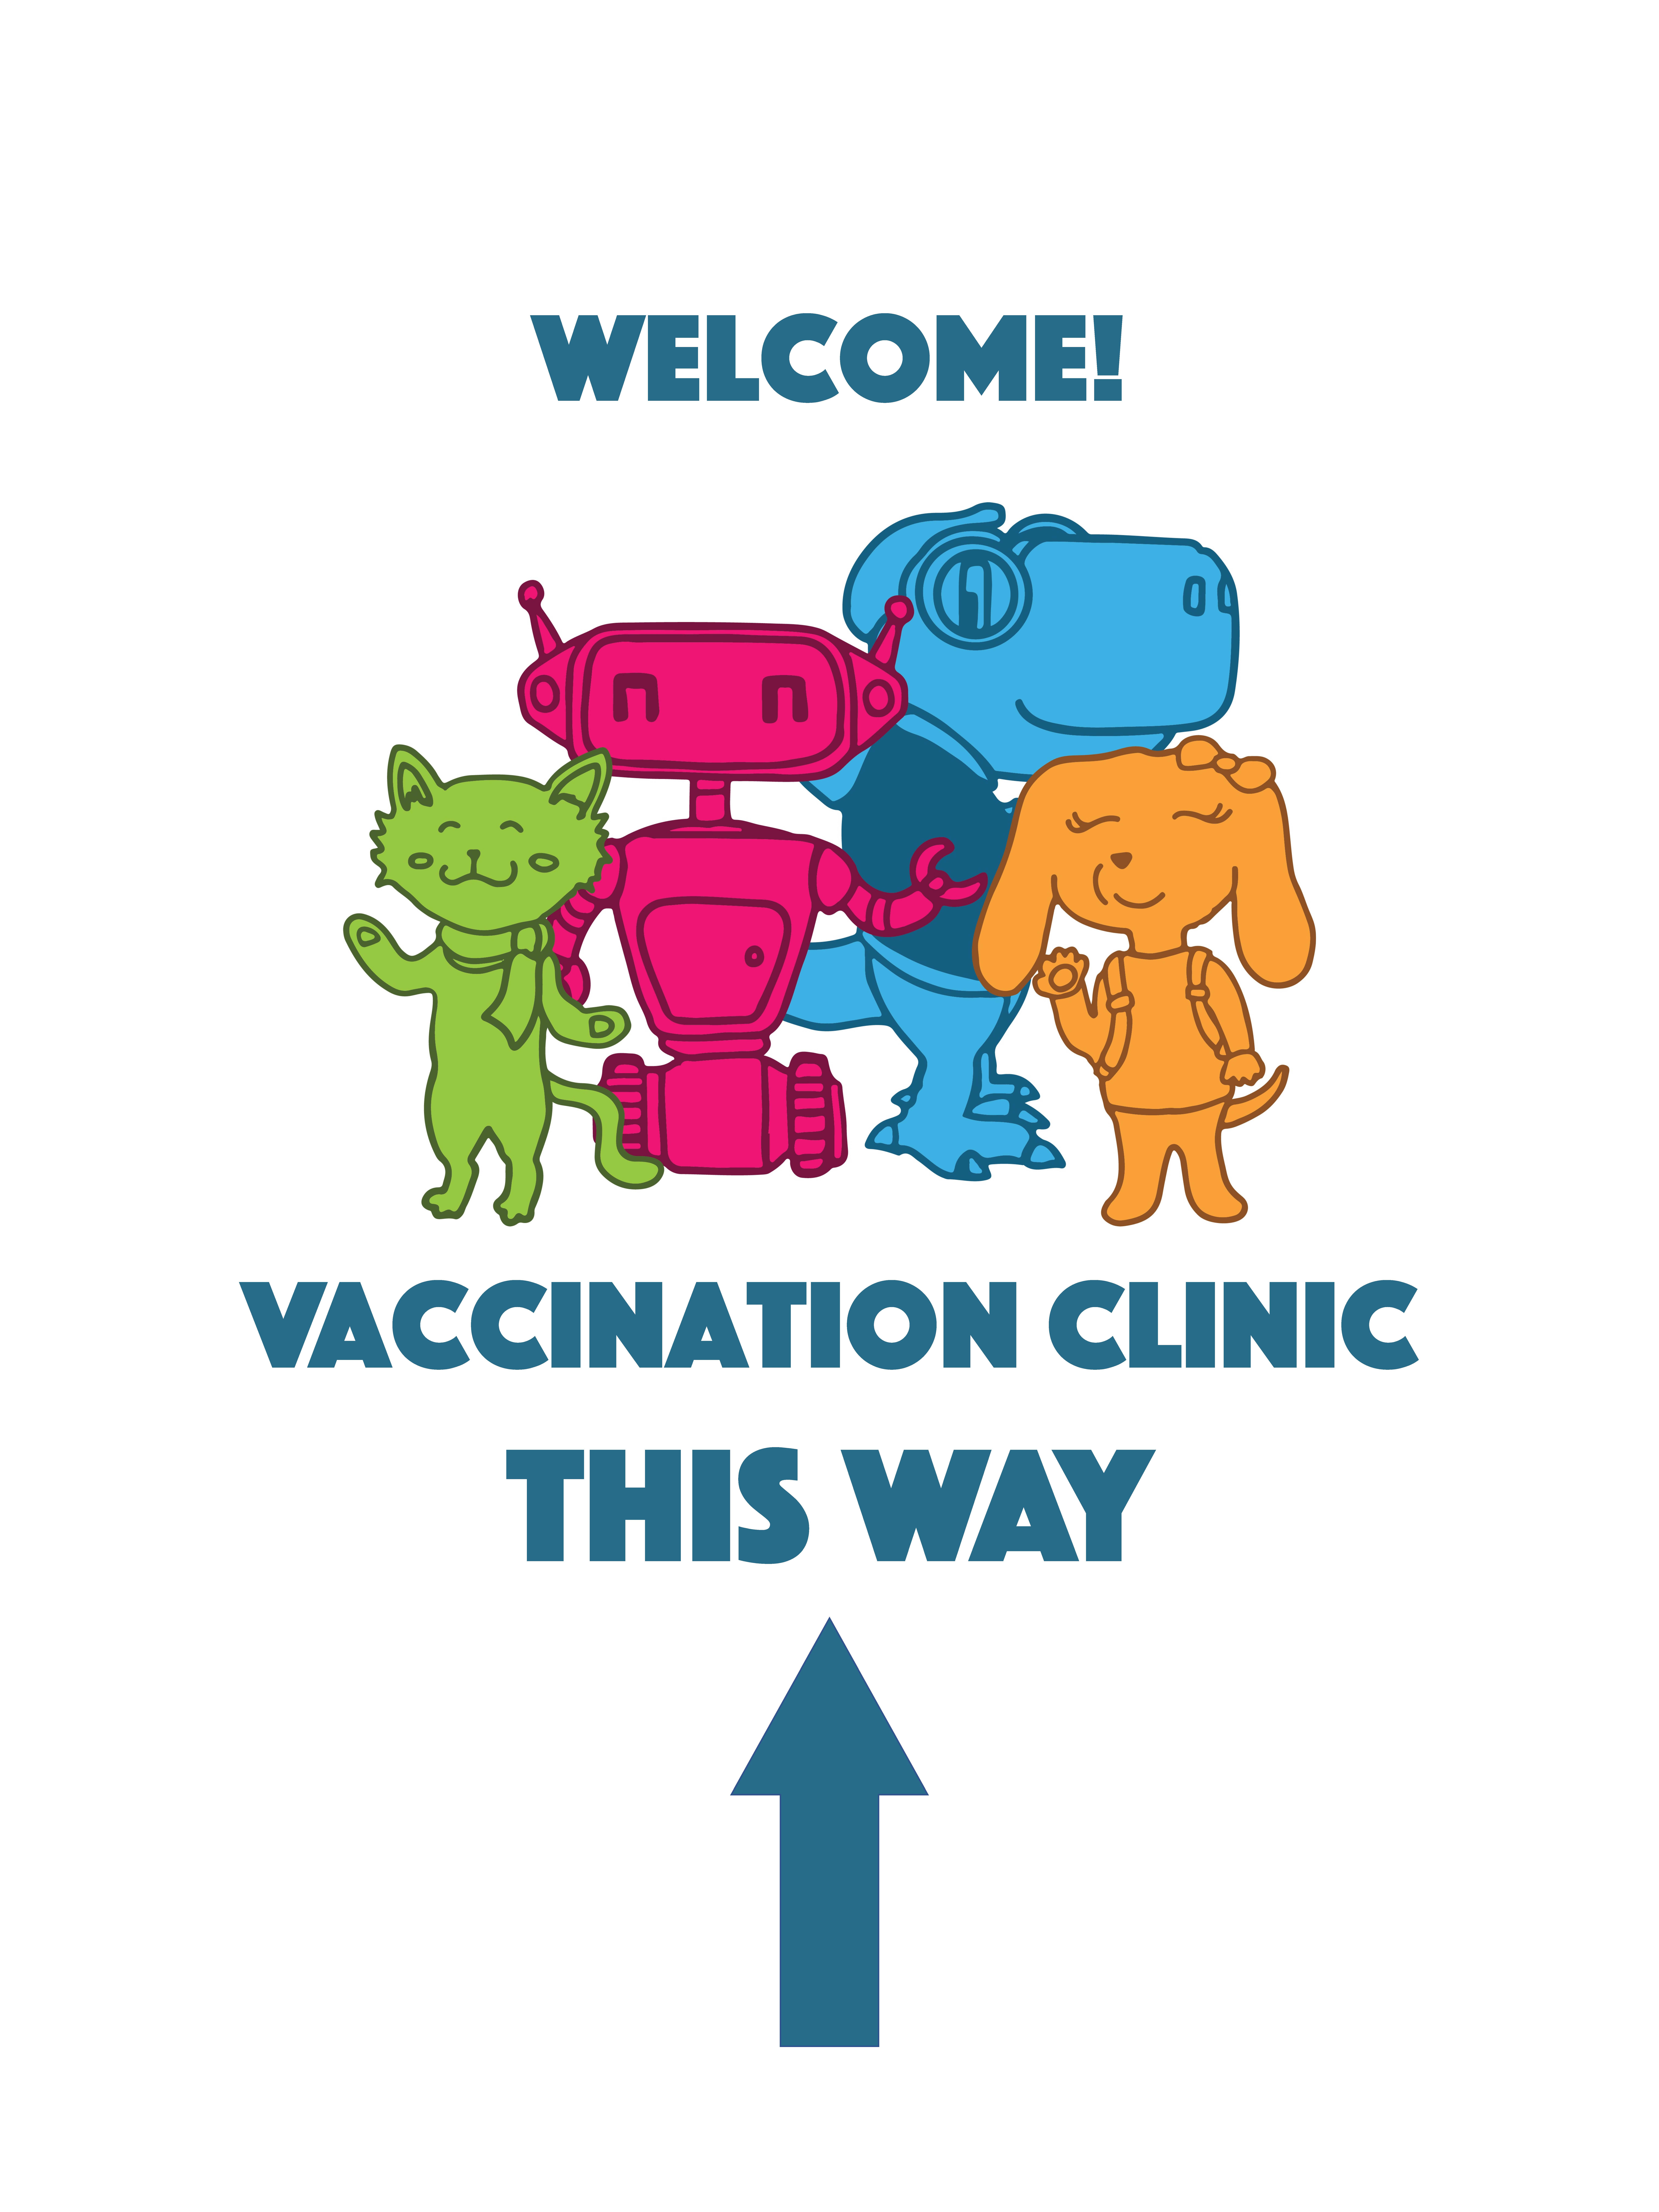 Vaccination clinic signage